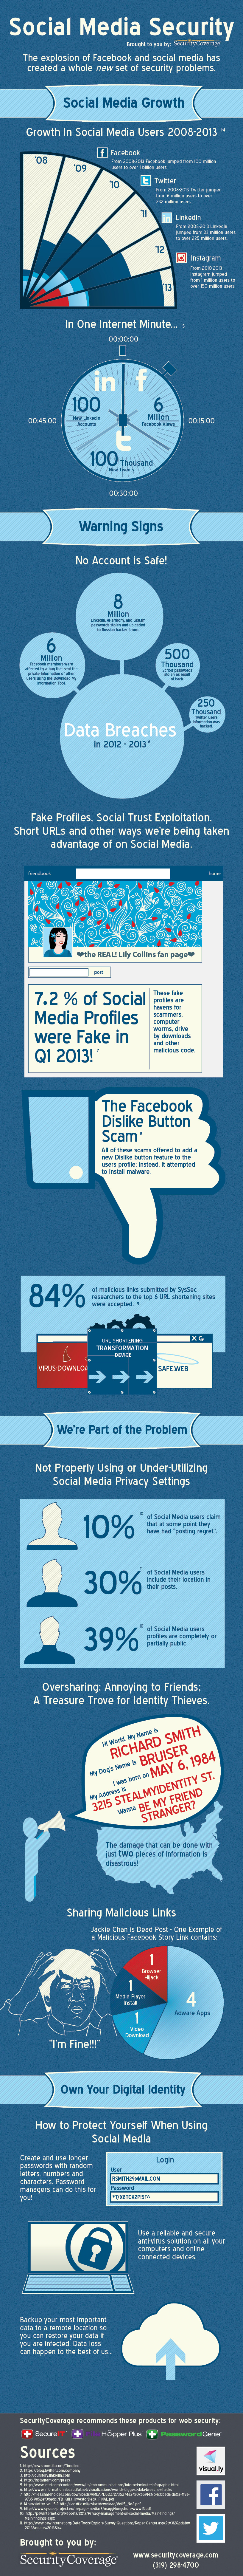 Social Media Security Infographic by SecurityCoverage, Inc.